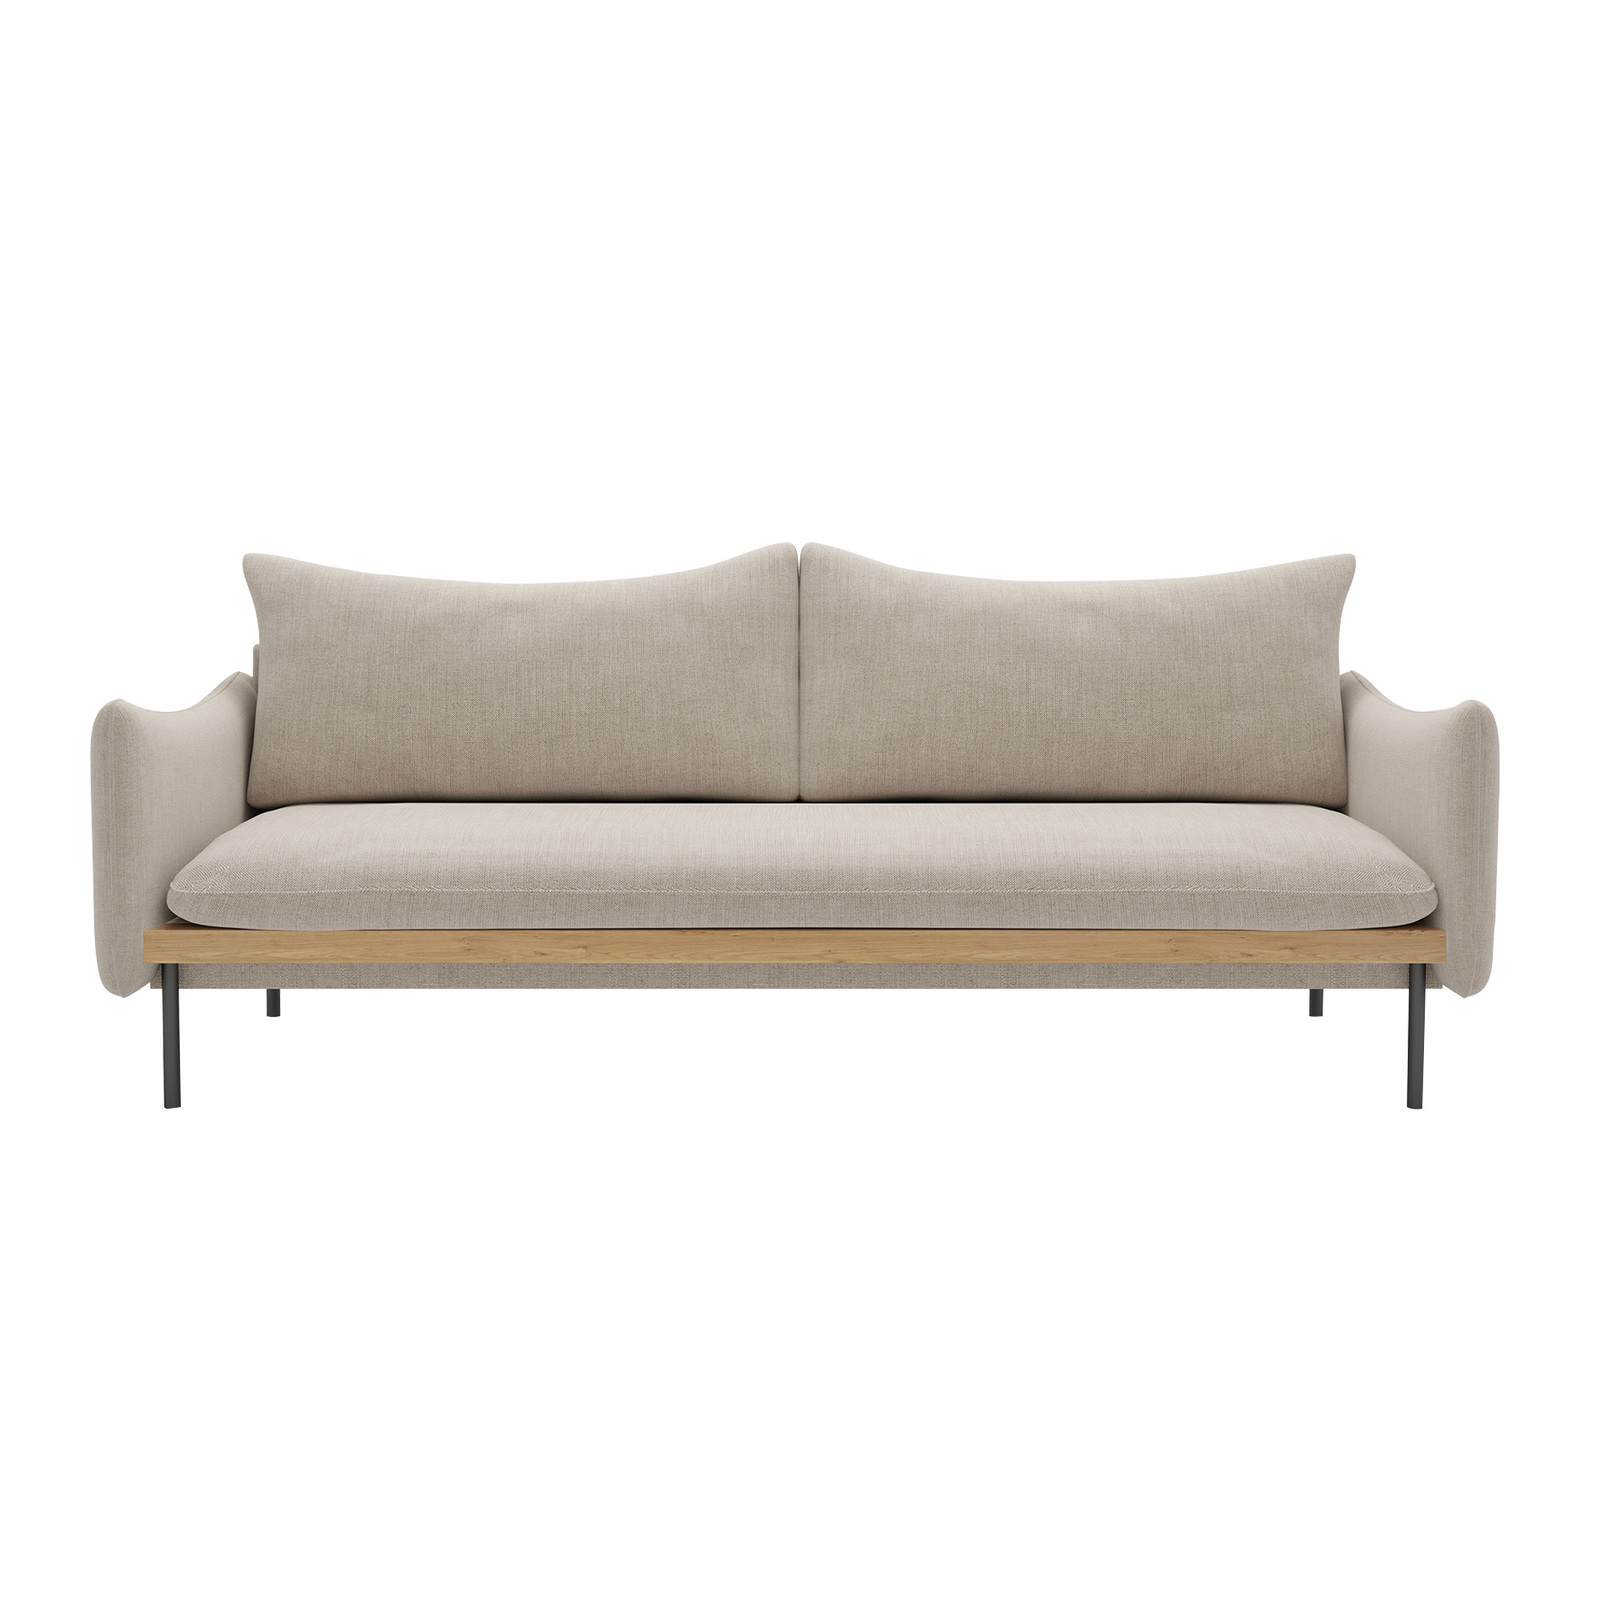 Sofa Large Double 2-3 Seater Couch Lounge Seating - Off White 2 Sizes